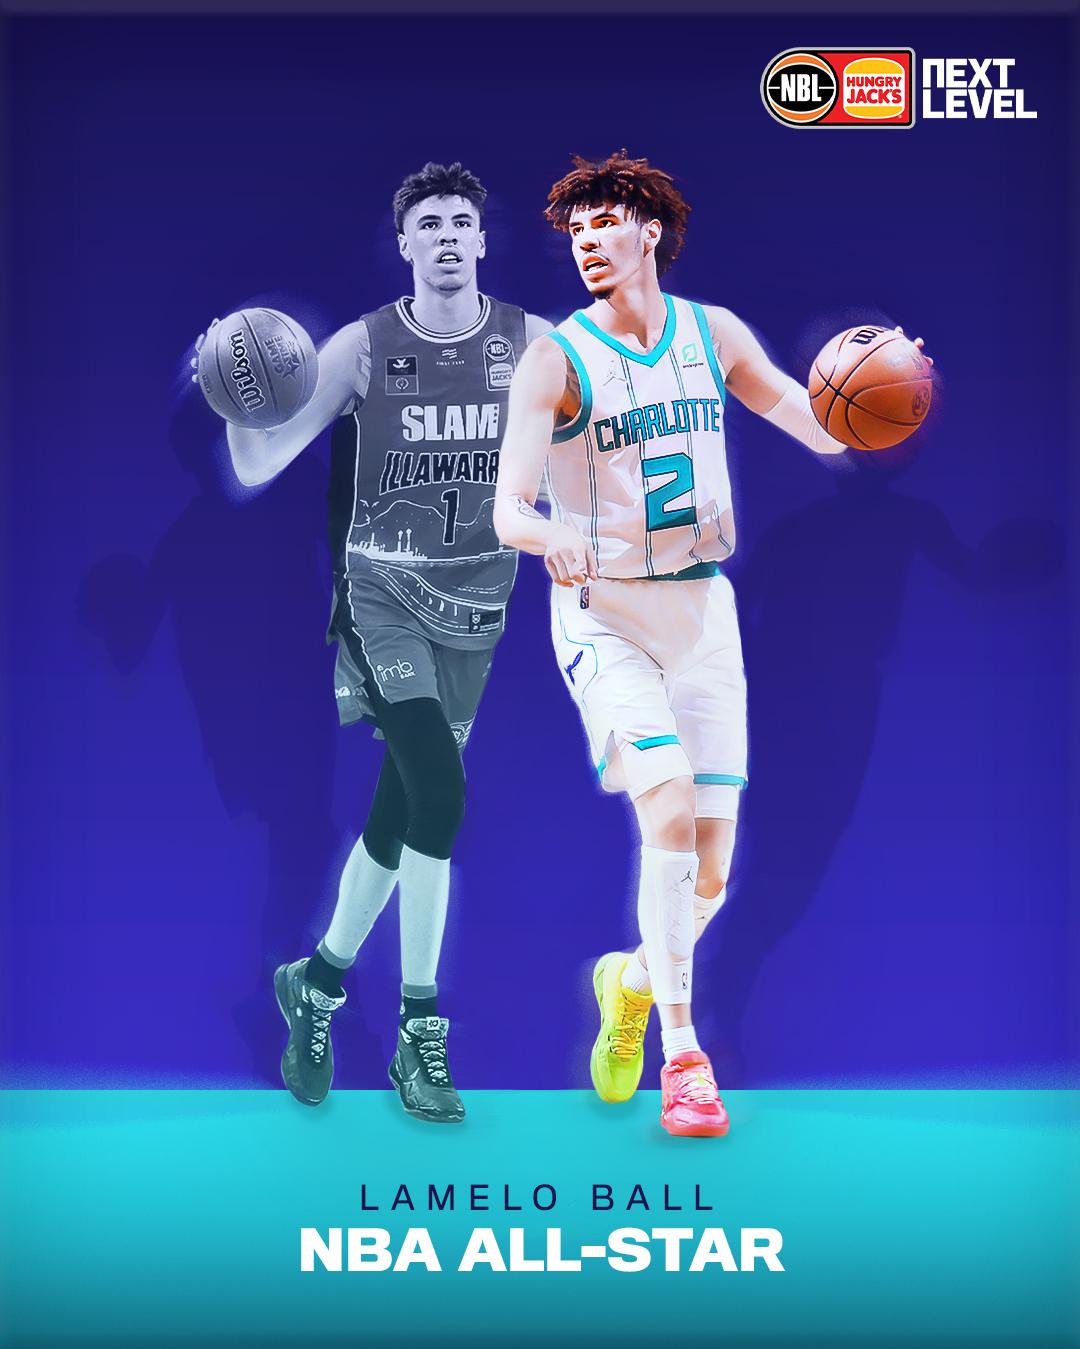 Nbl On X Congratulations To Lamelo Ball Being Named An Nba